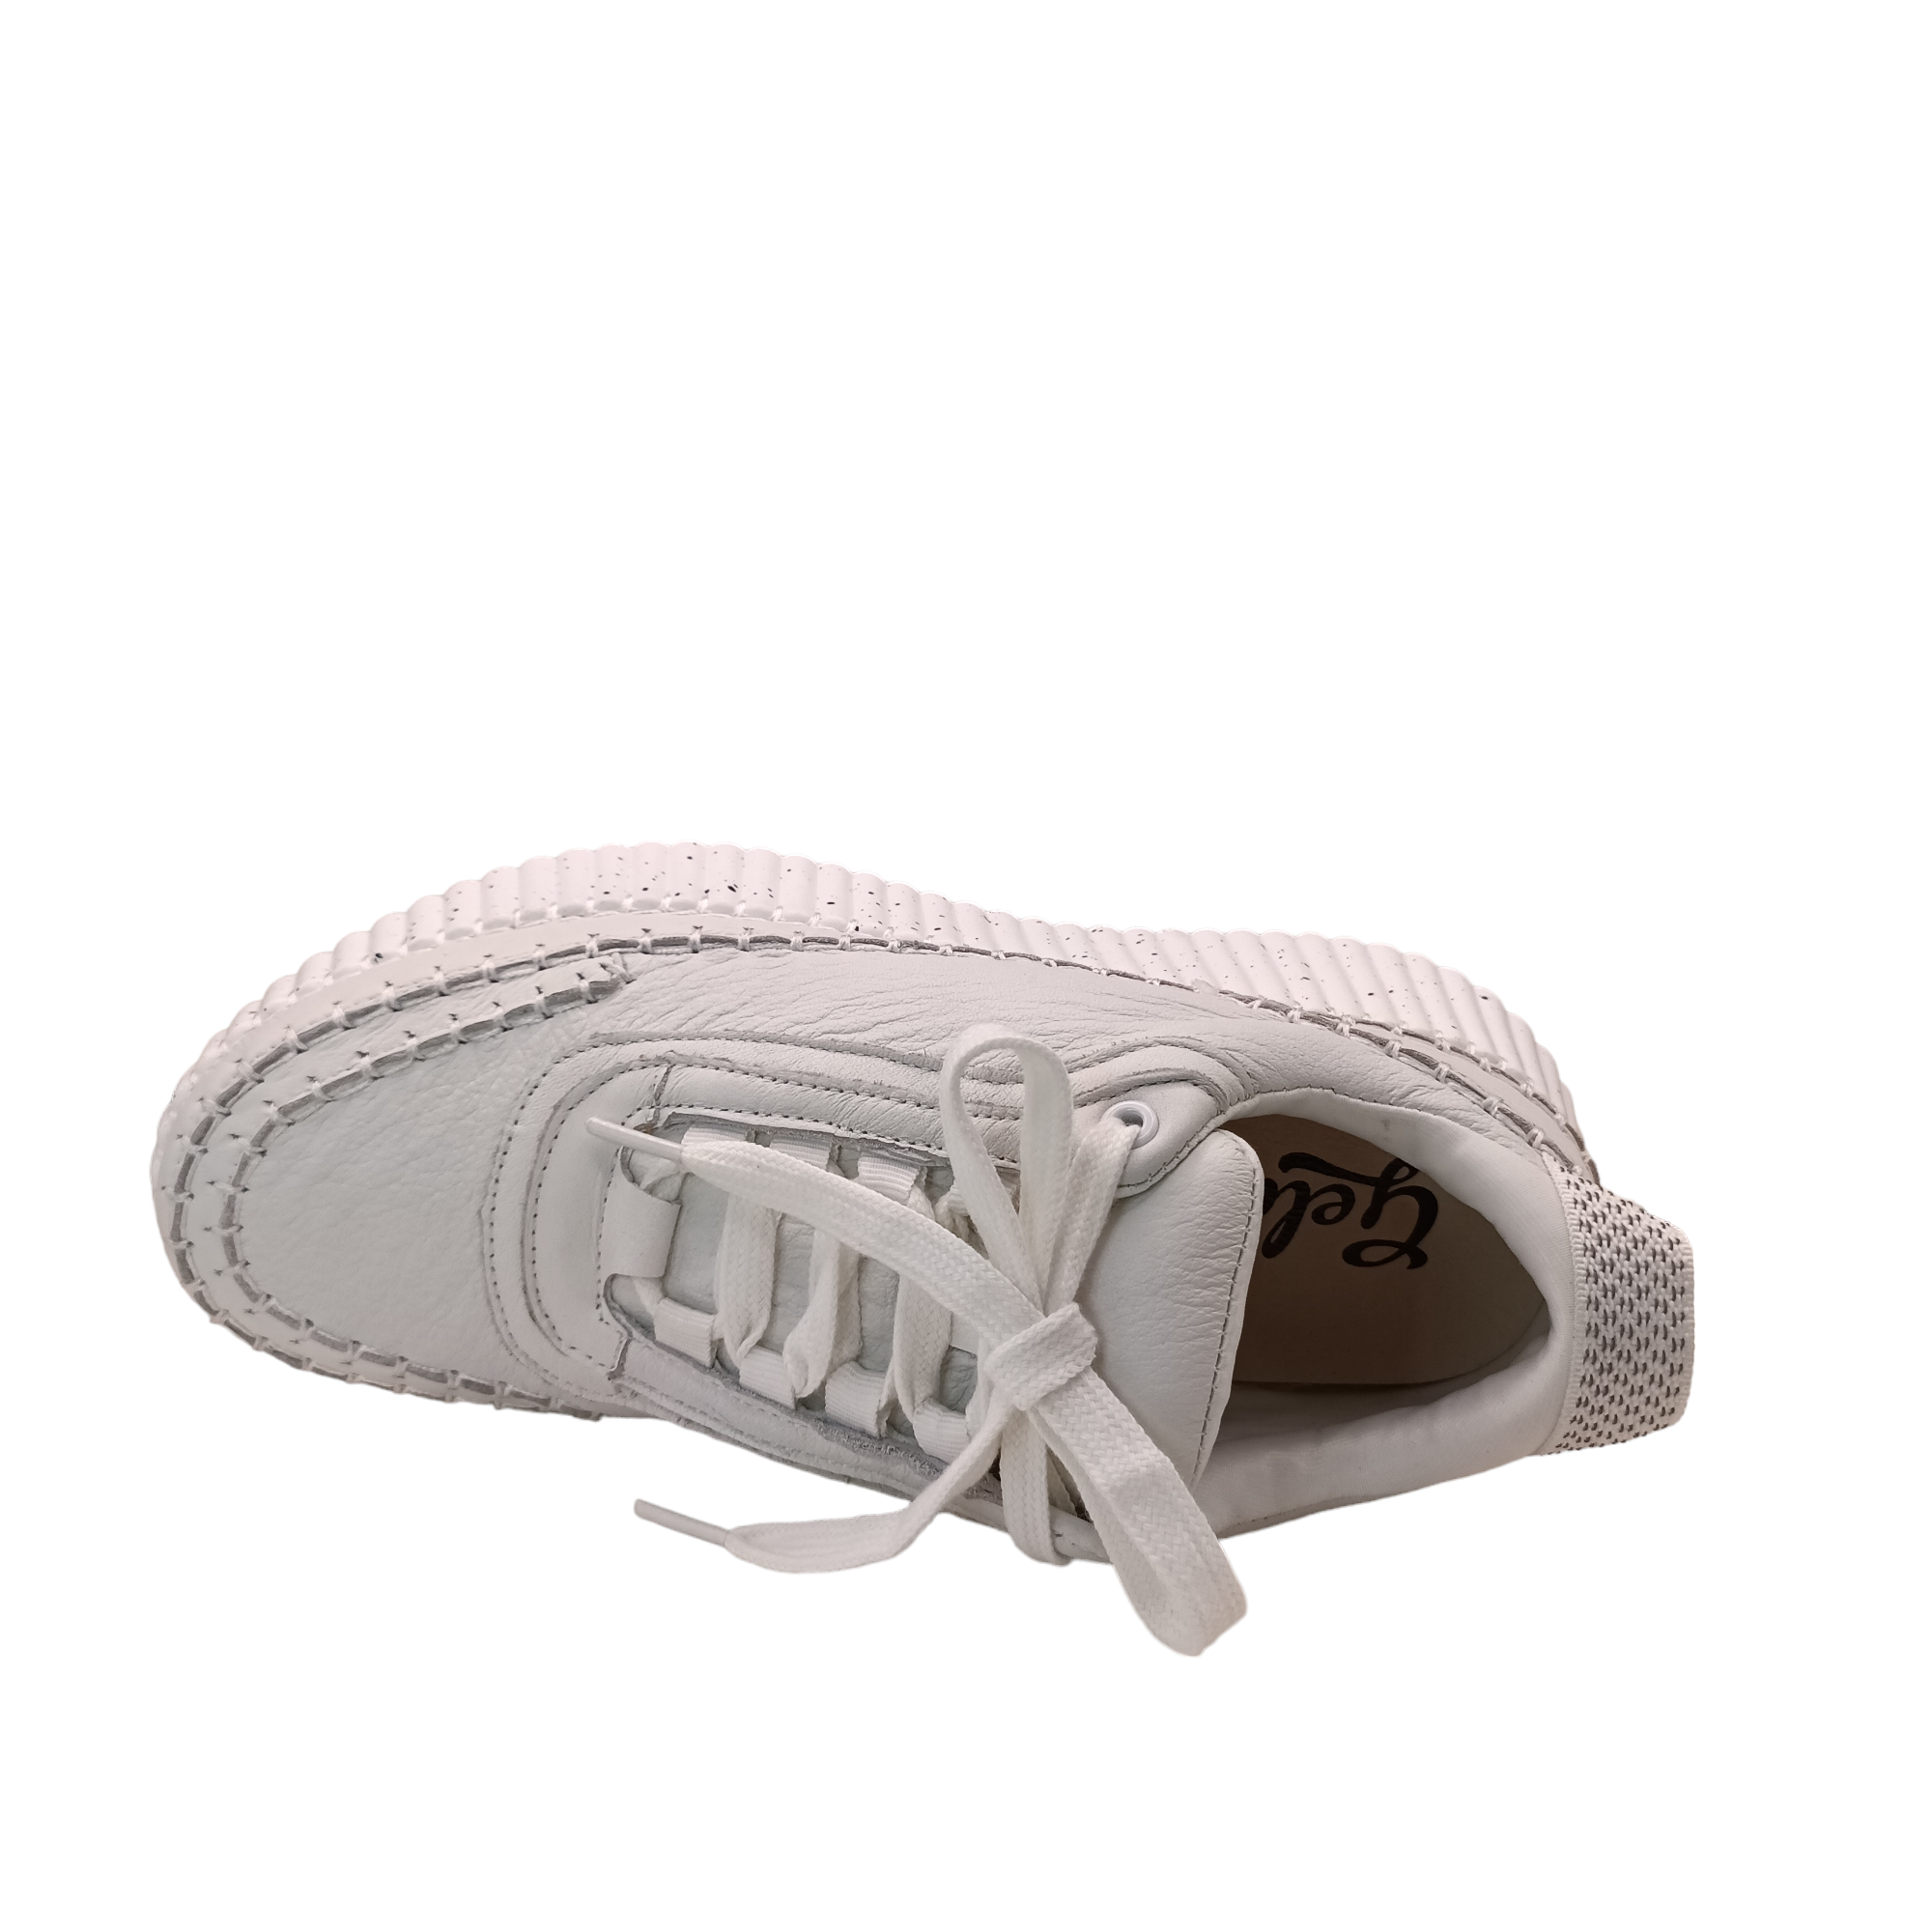 Shop Pluto - with shoe&amp;me - from Gelato - Sneakers - Sneakers, Winter, Womens